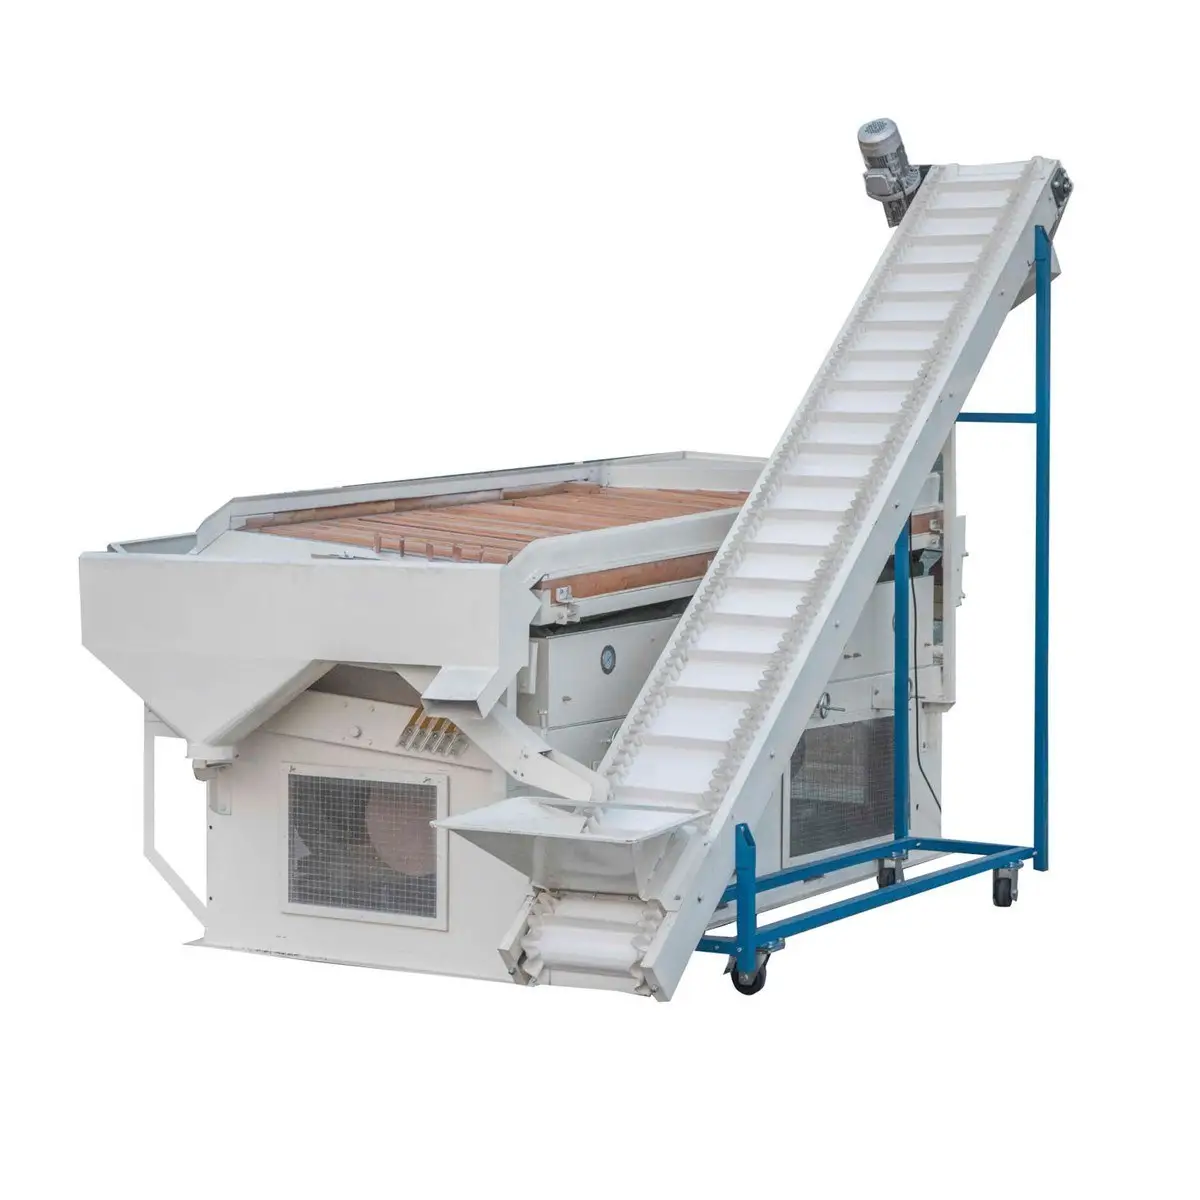 Top Selling Peanut Gravity Separator Suitable To Separate Split Peanut Available at Affordable Price for Export Selling Use